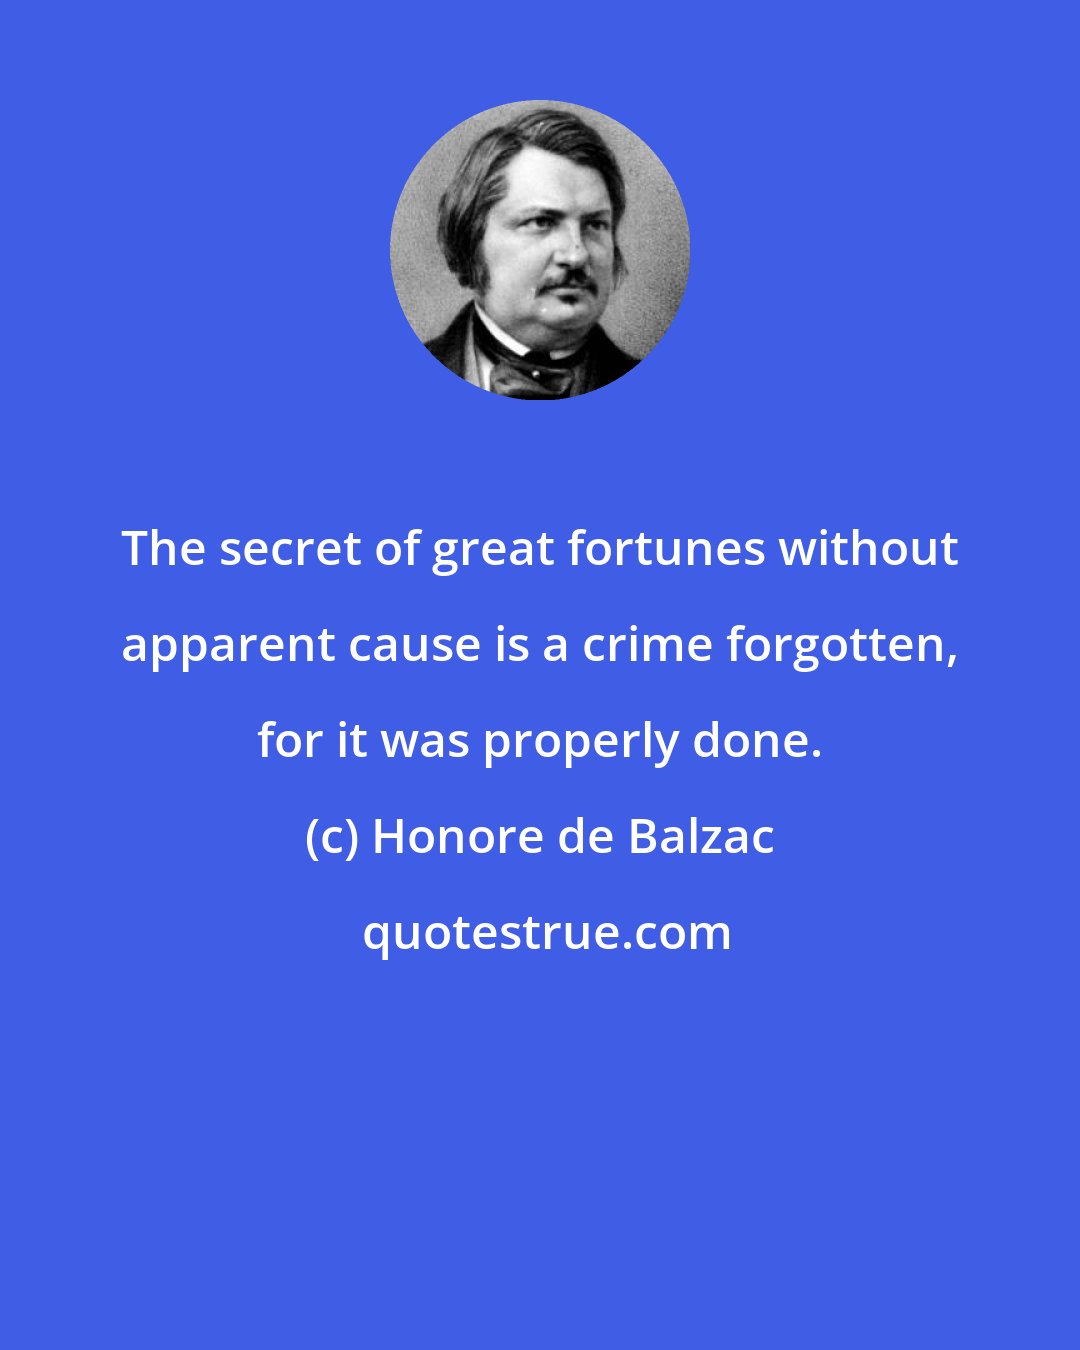 Honore de Balzac: The secret of great fortunes without apparent cause is a crime forgotten, for it was properly done.